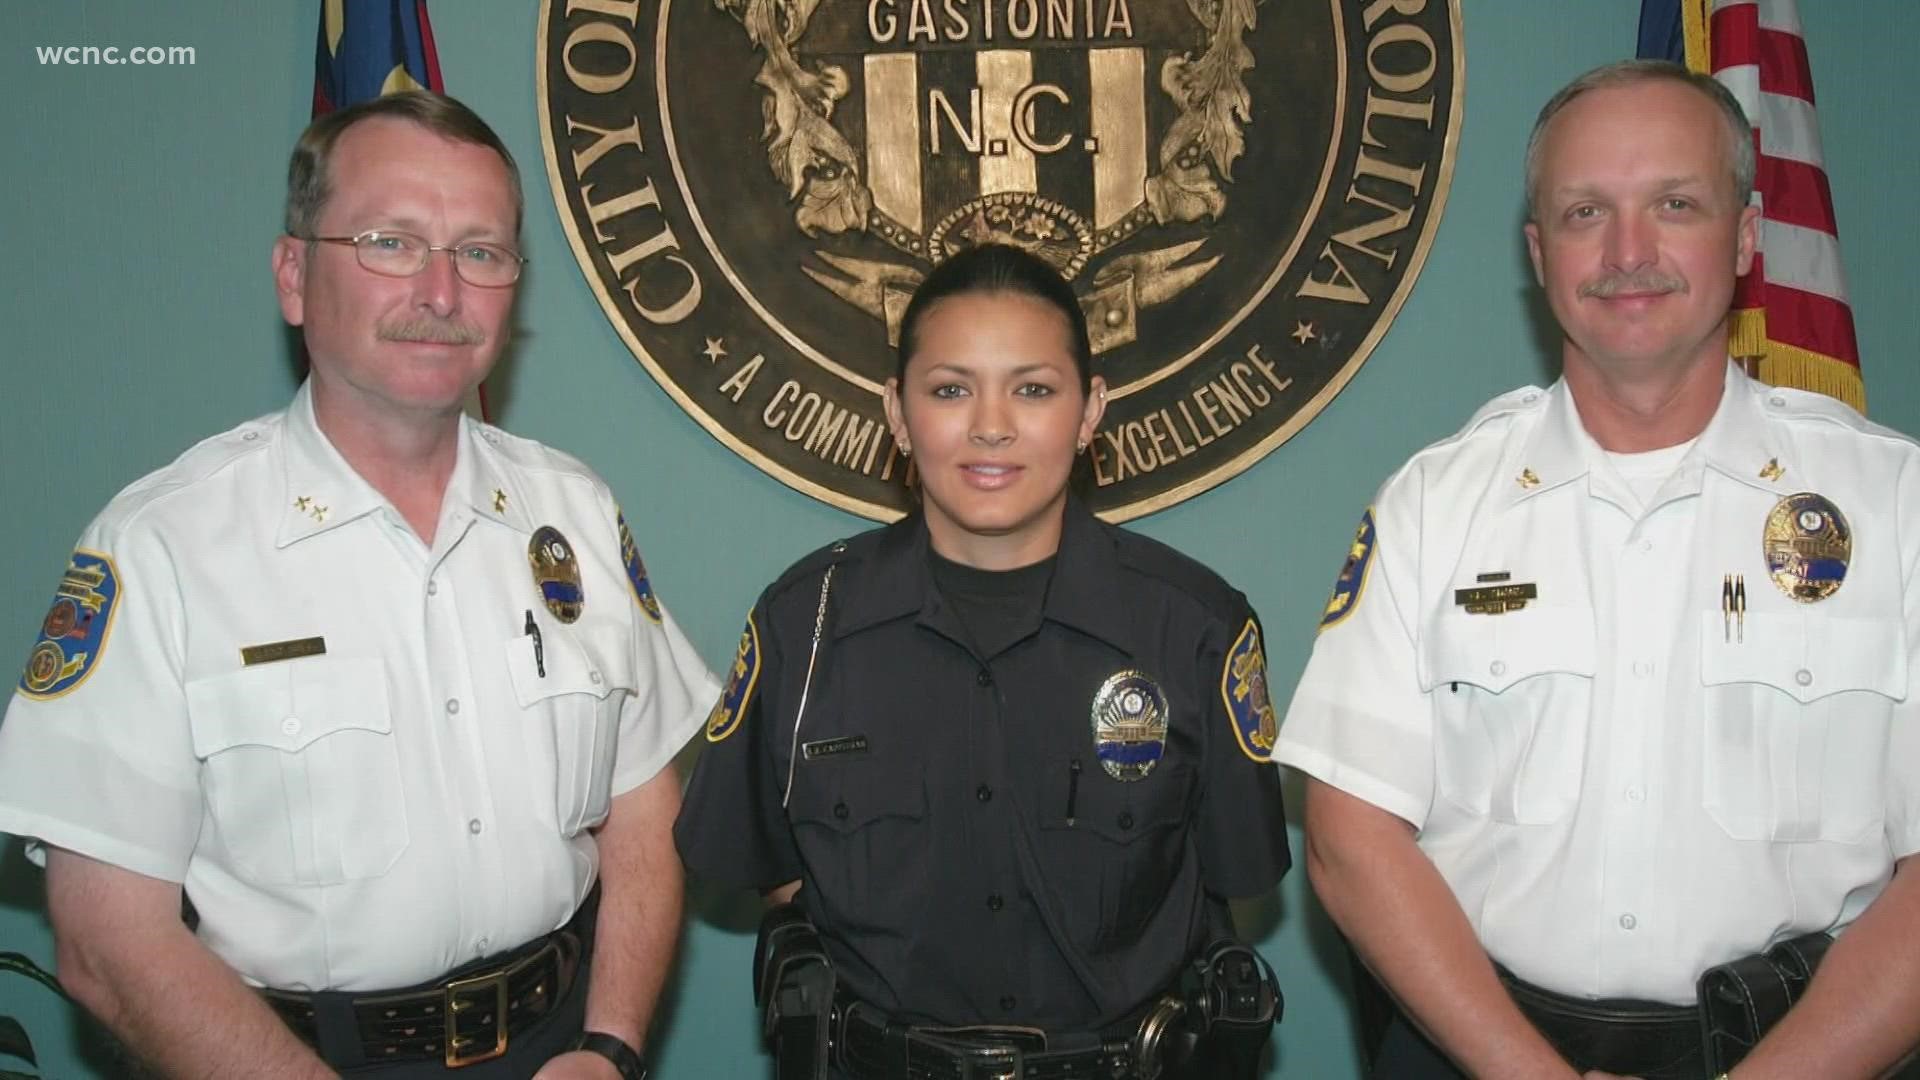 Last August the department promoted Nancy Brogdon...becoming its first-ever Latina assistant police chief.